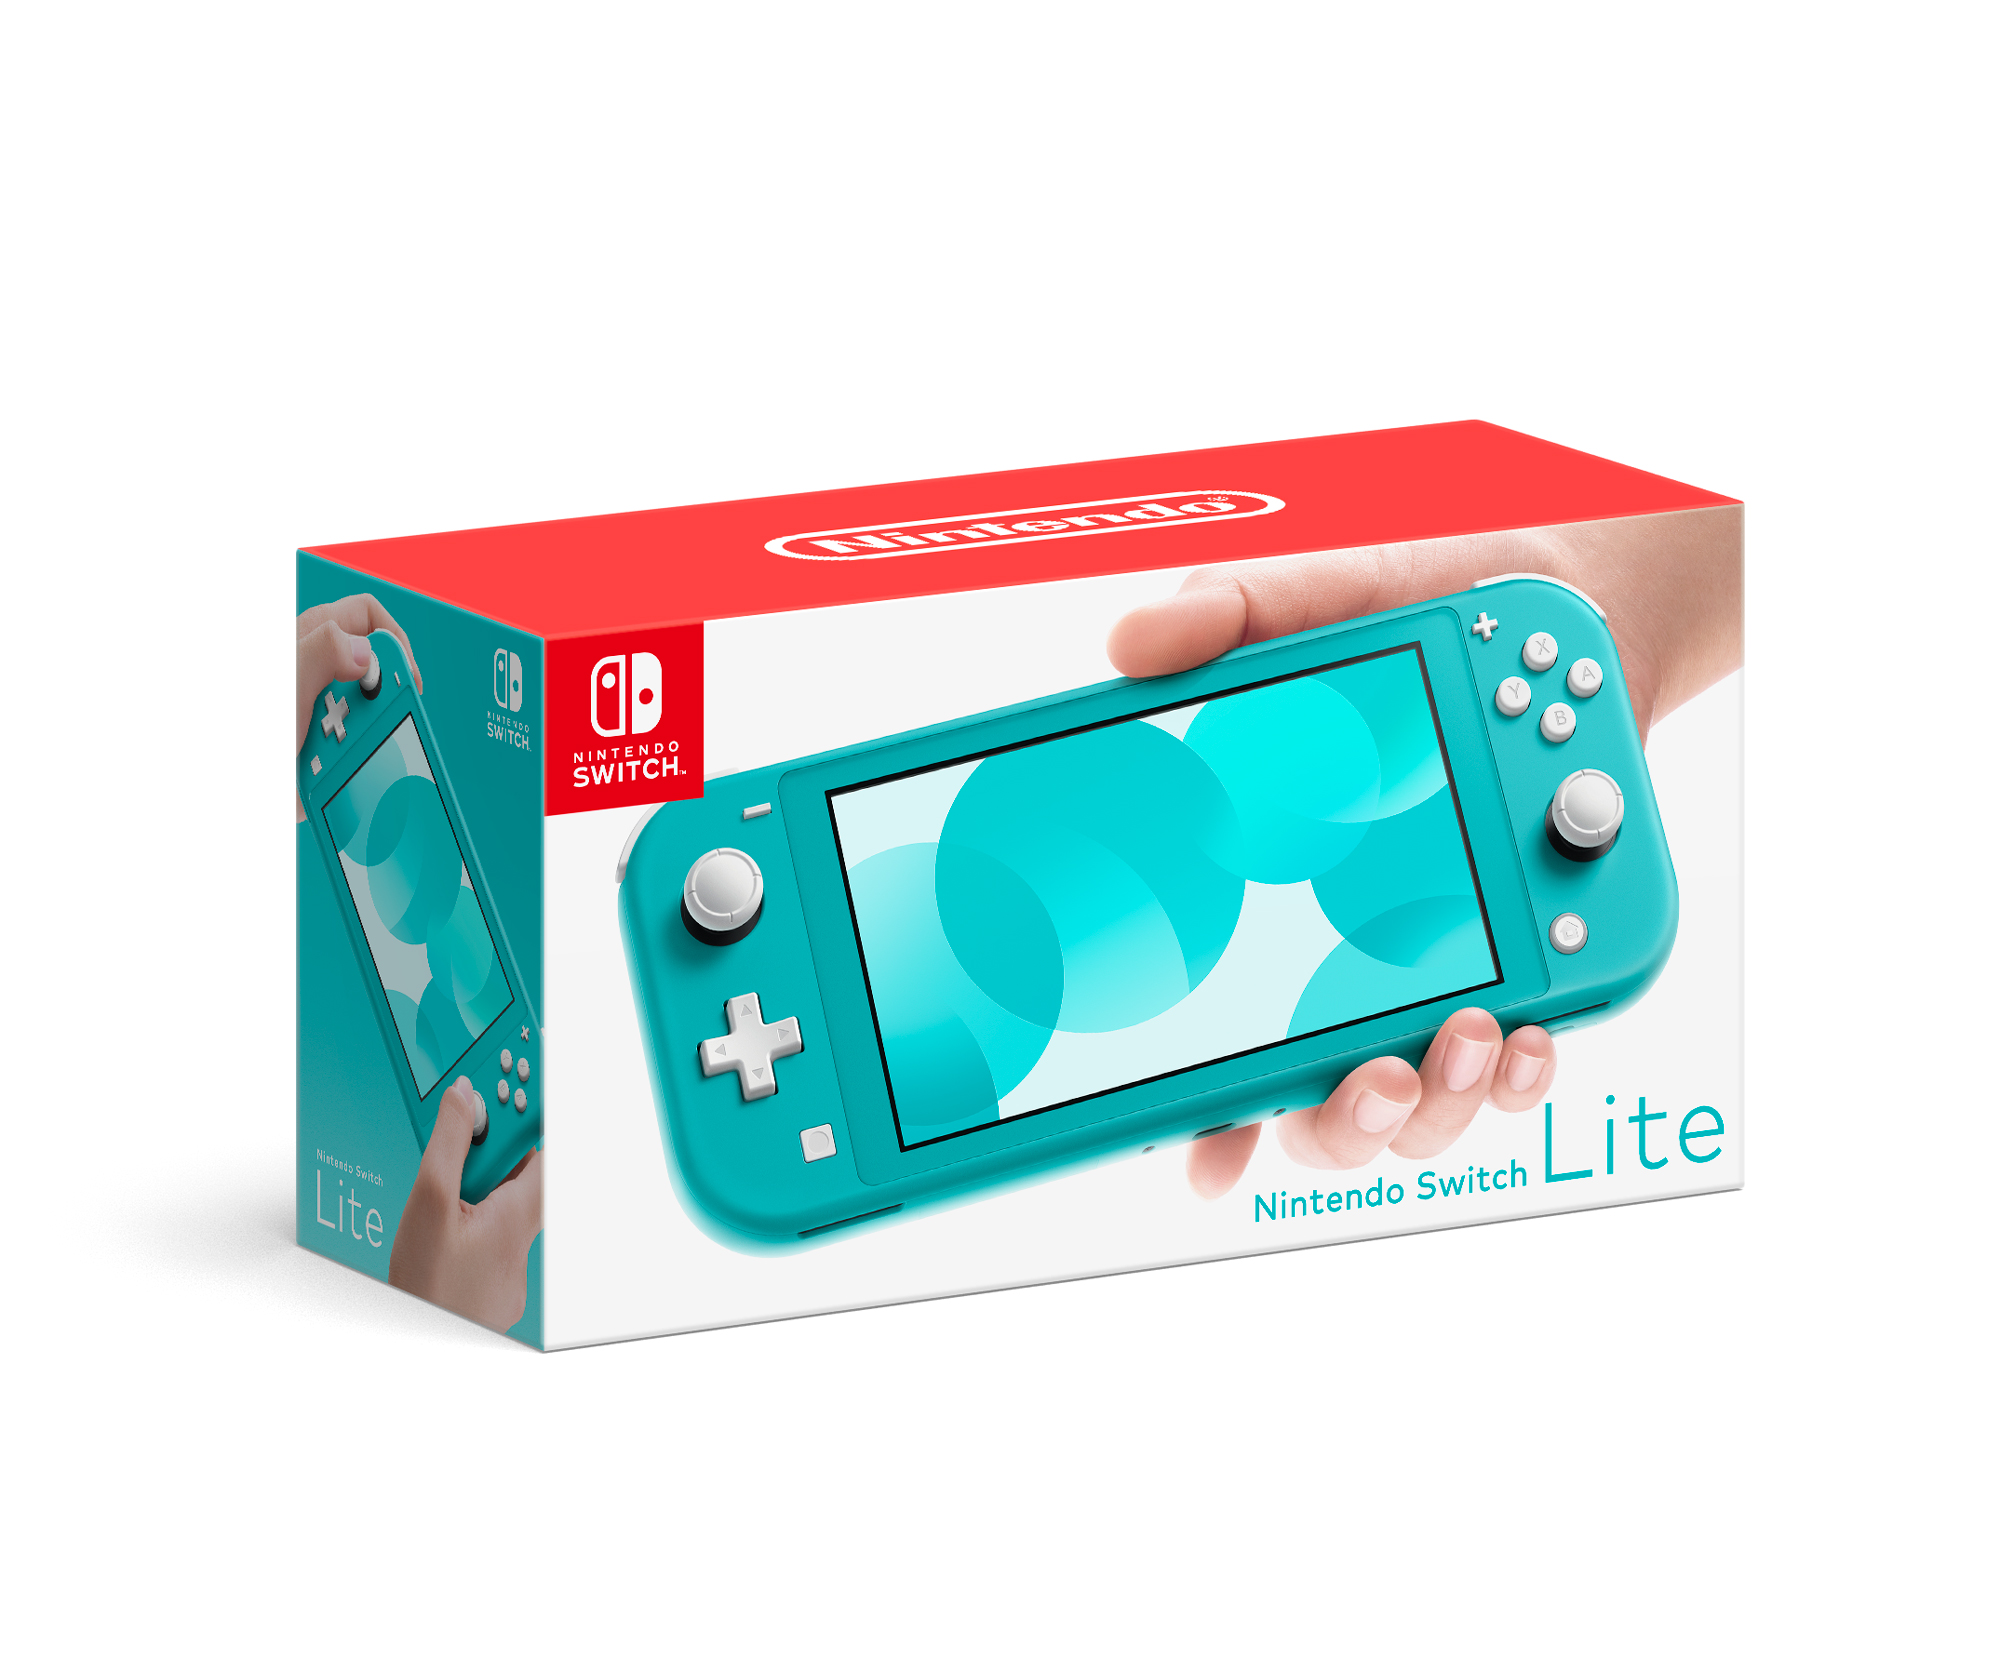 Nintendo Switch Lite Console, Turquoise - image 1 of 2